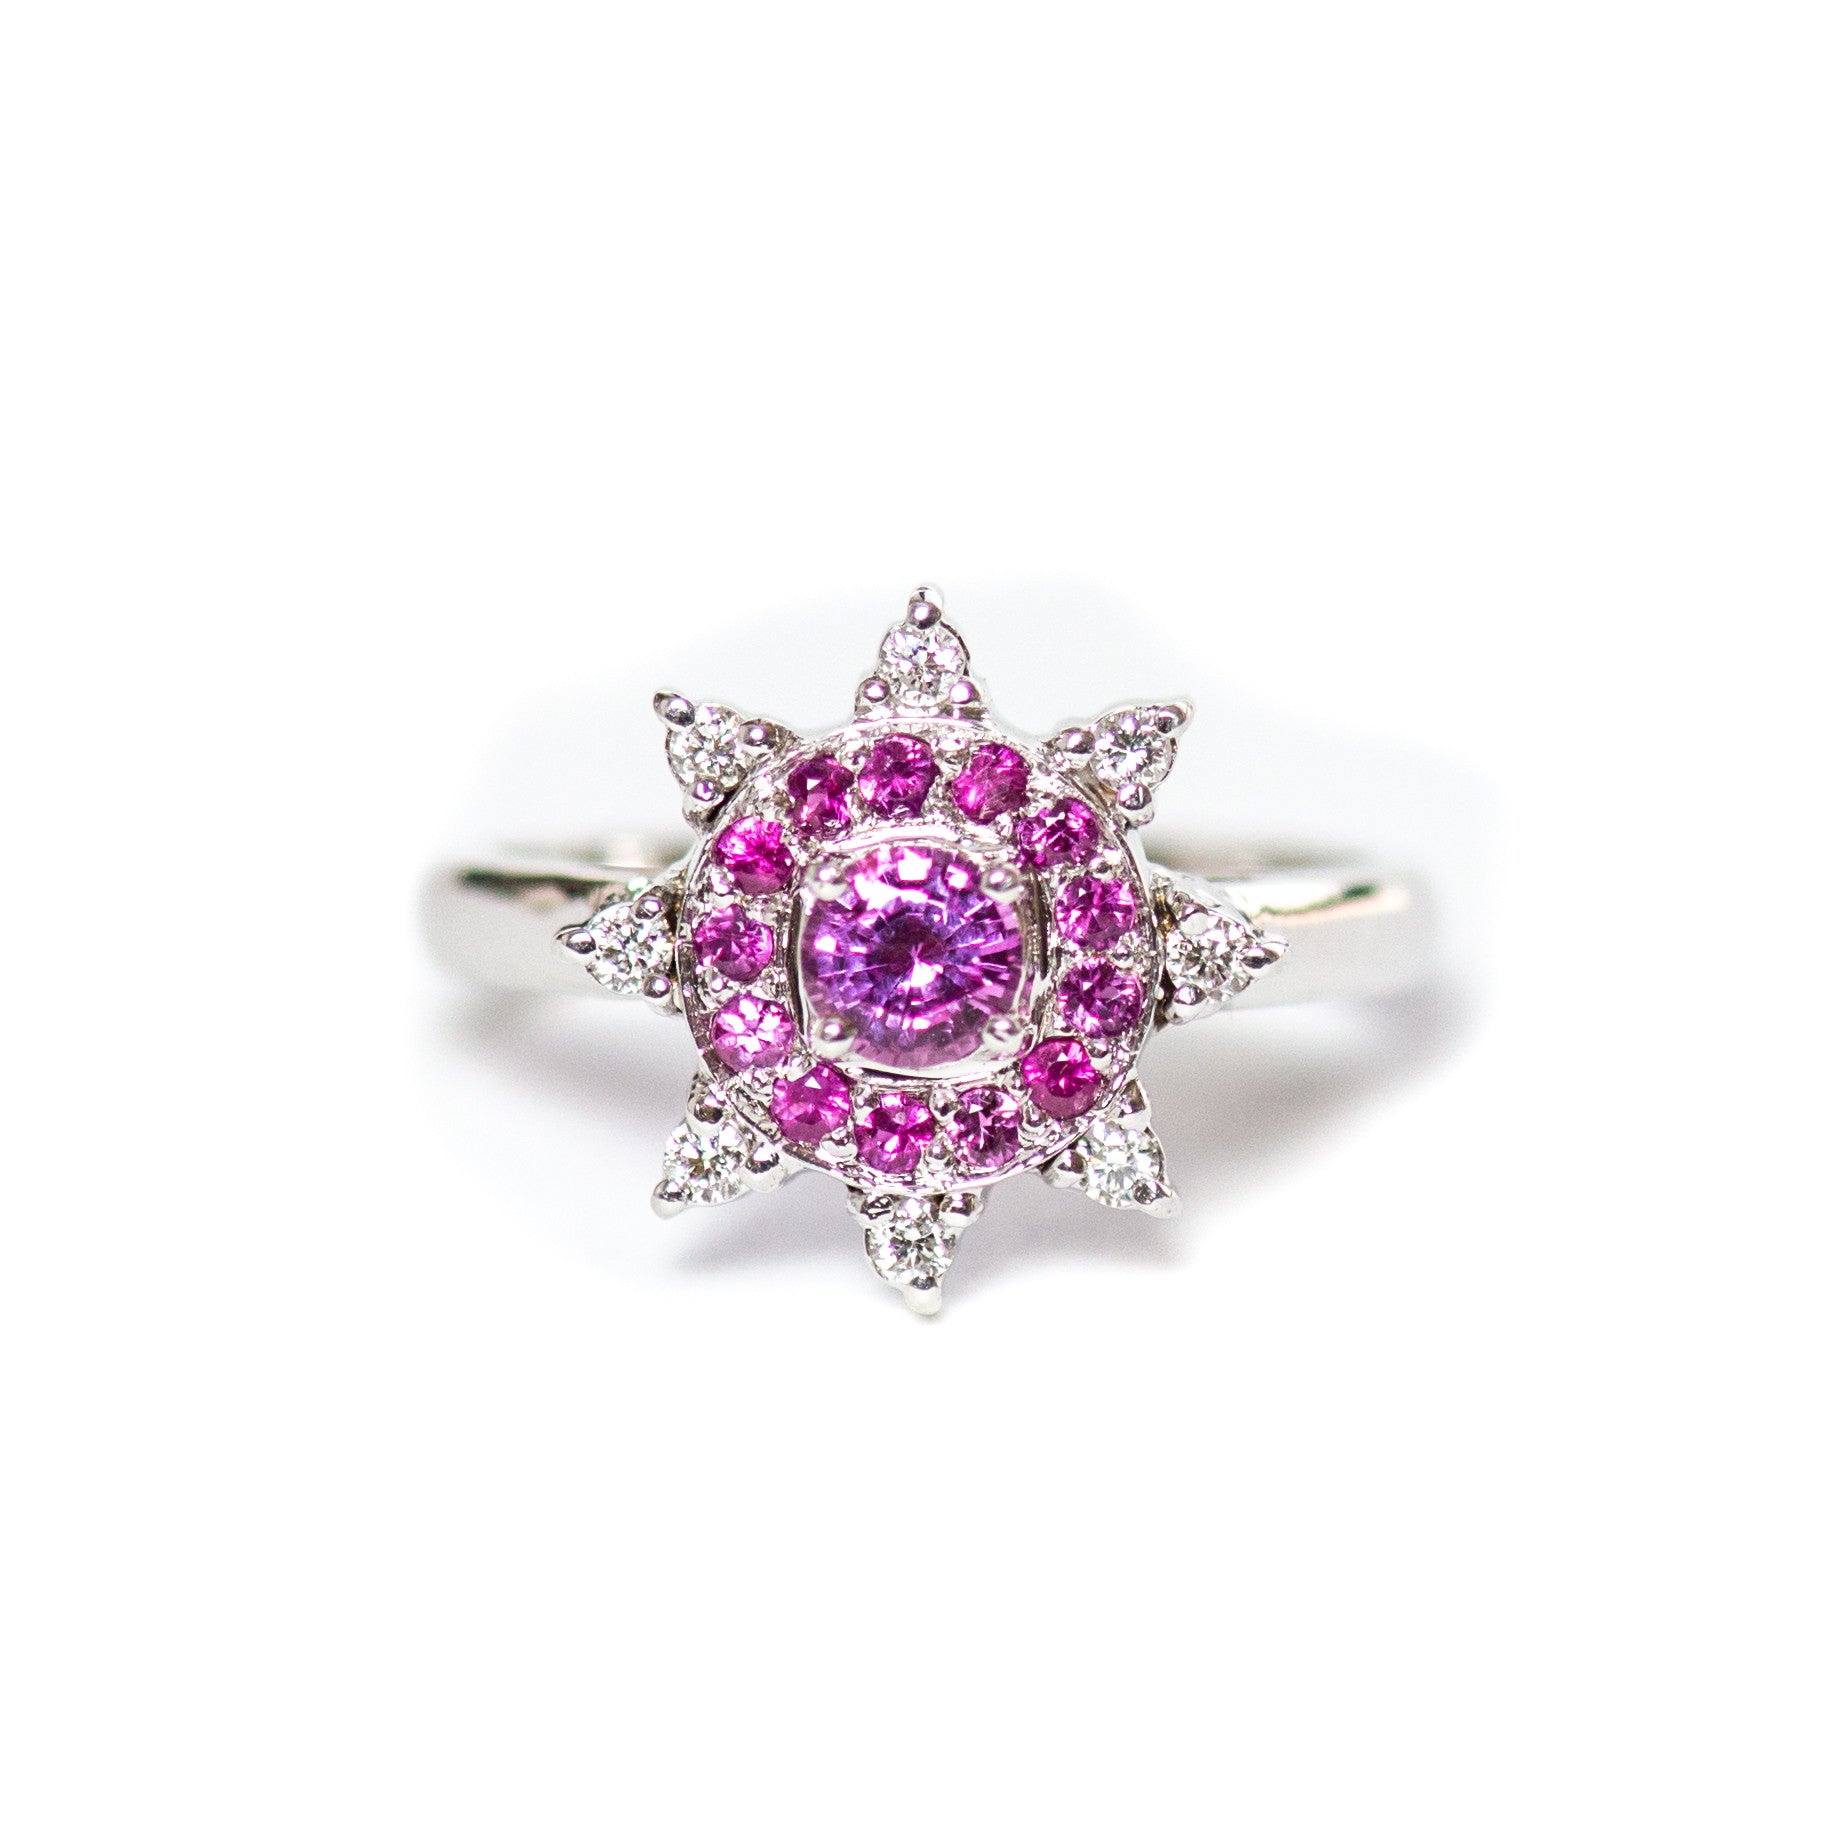 Australian pink sapphire with pink rubies and diamonds 14k white gold flower ring a Size 6 - Ready to ship or Resize CLICK HERE - Sarah Hughes - 3